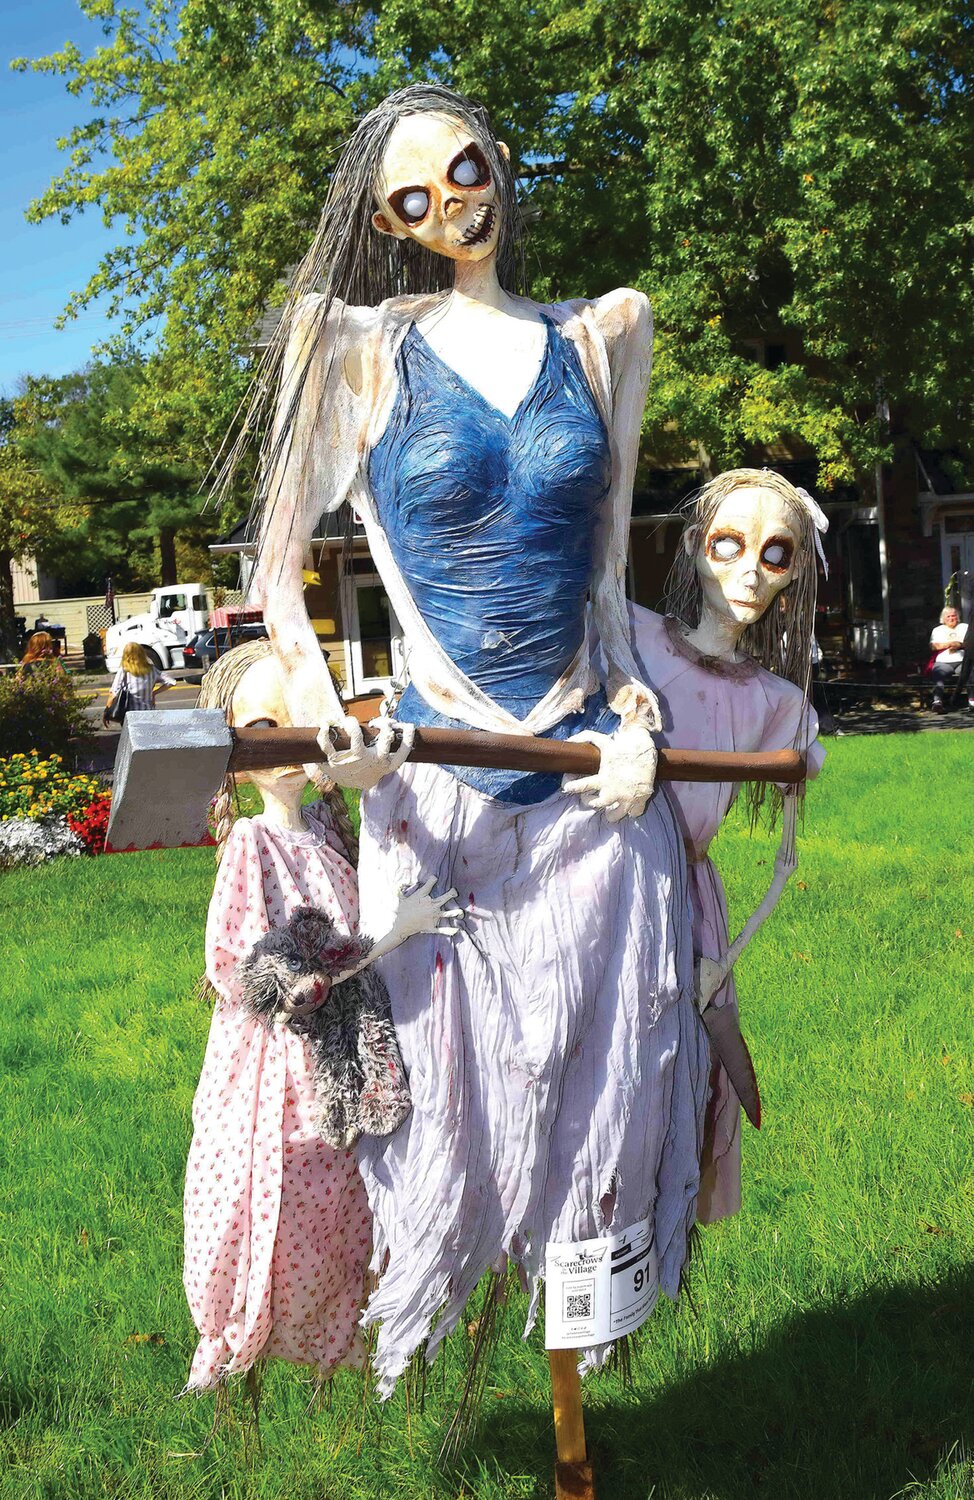 One of the scarecrow creations on display at Peddler’s Village, Lahaska.